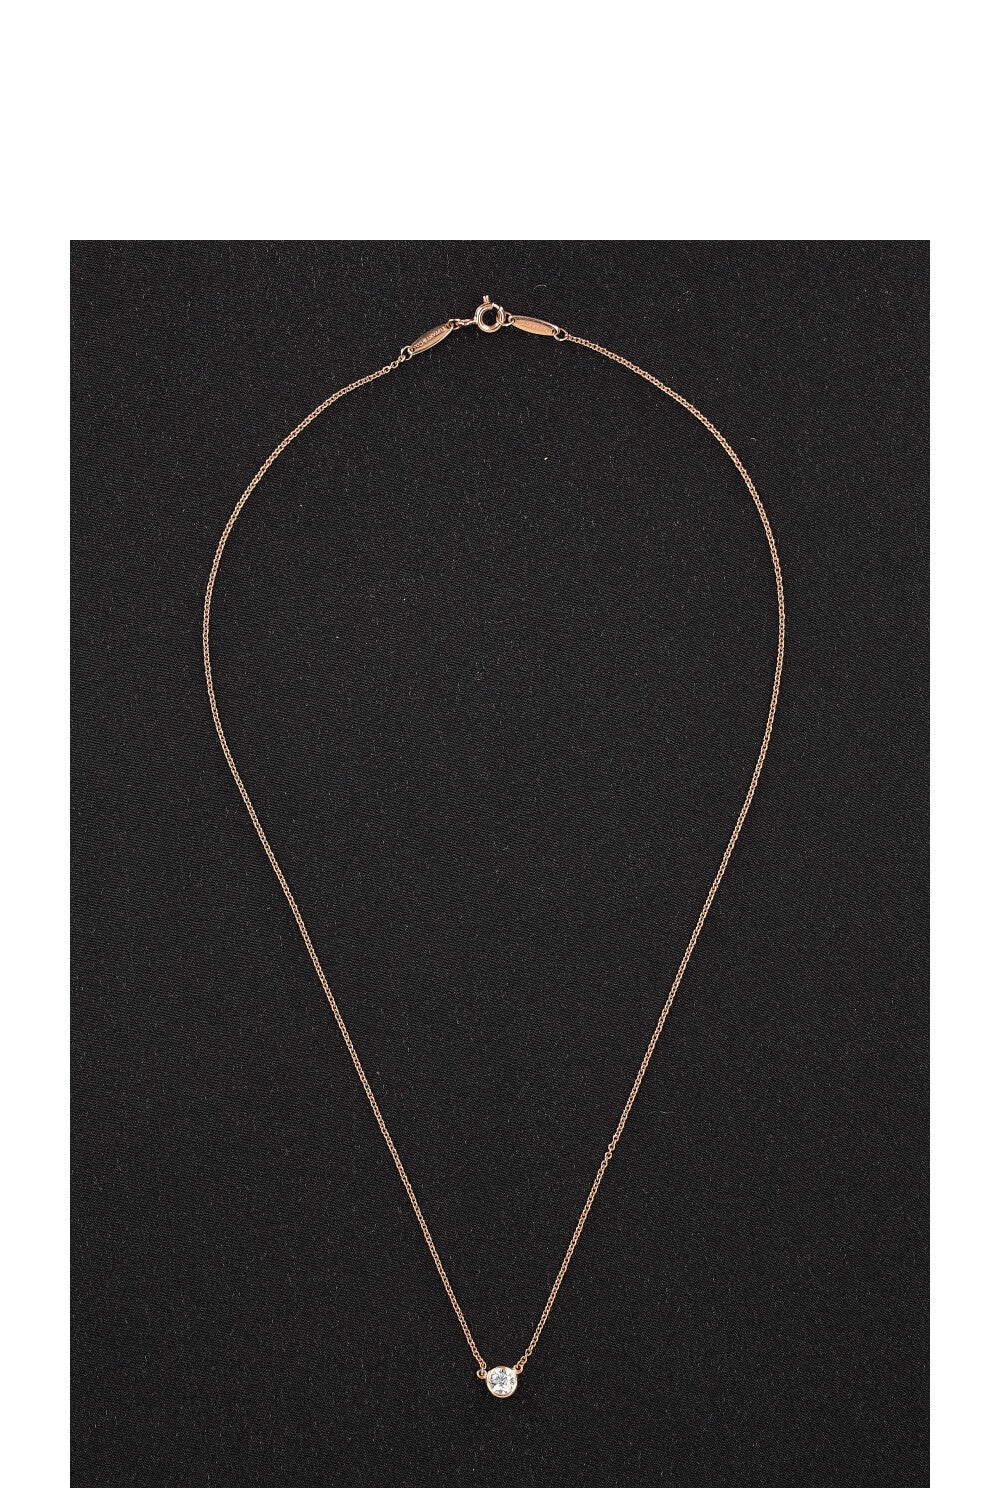 TIFFANY&CO 'Diamond By the Yard' Necklace Gold